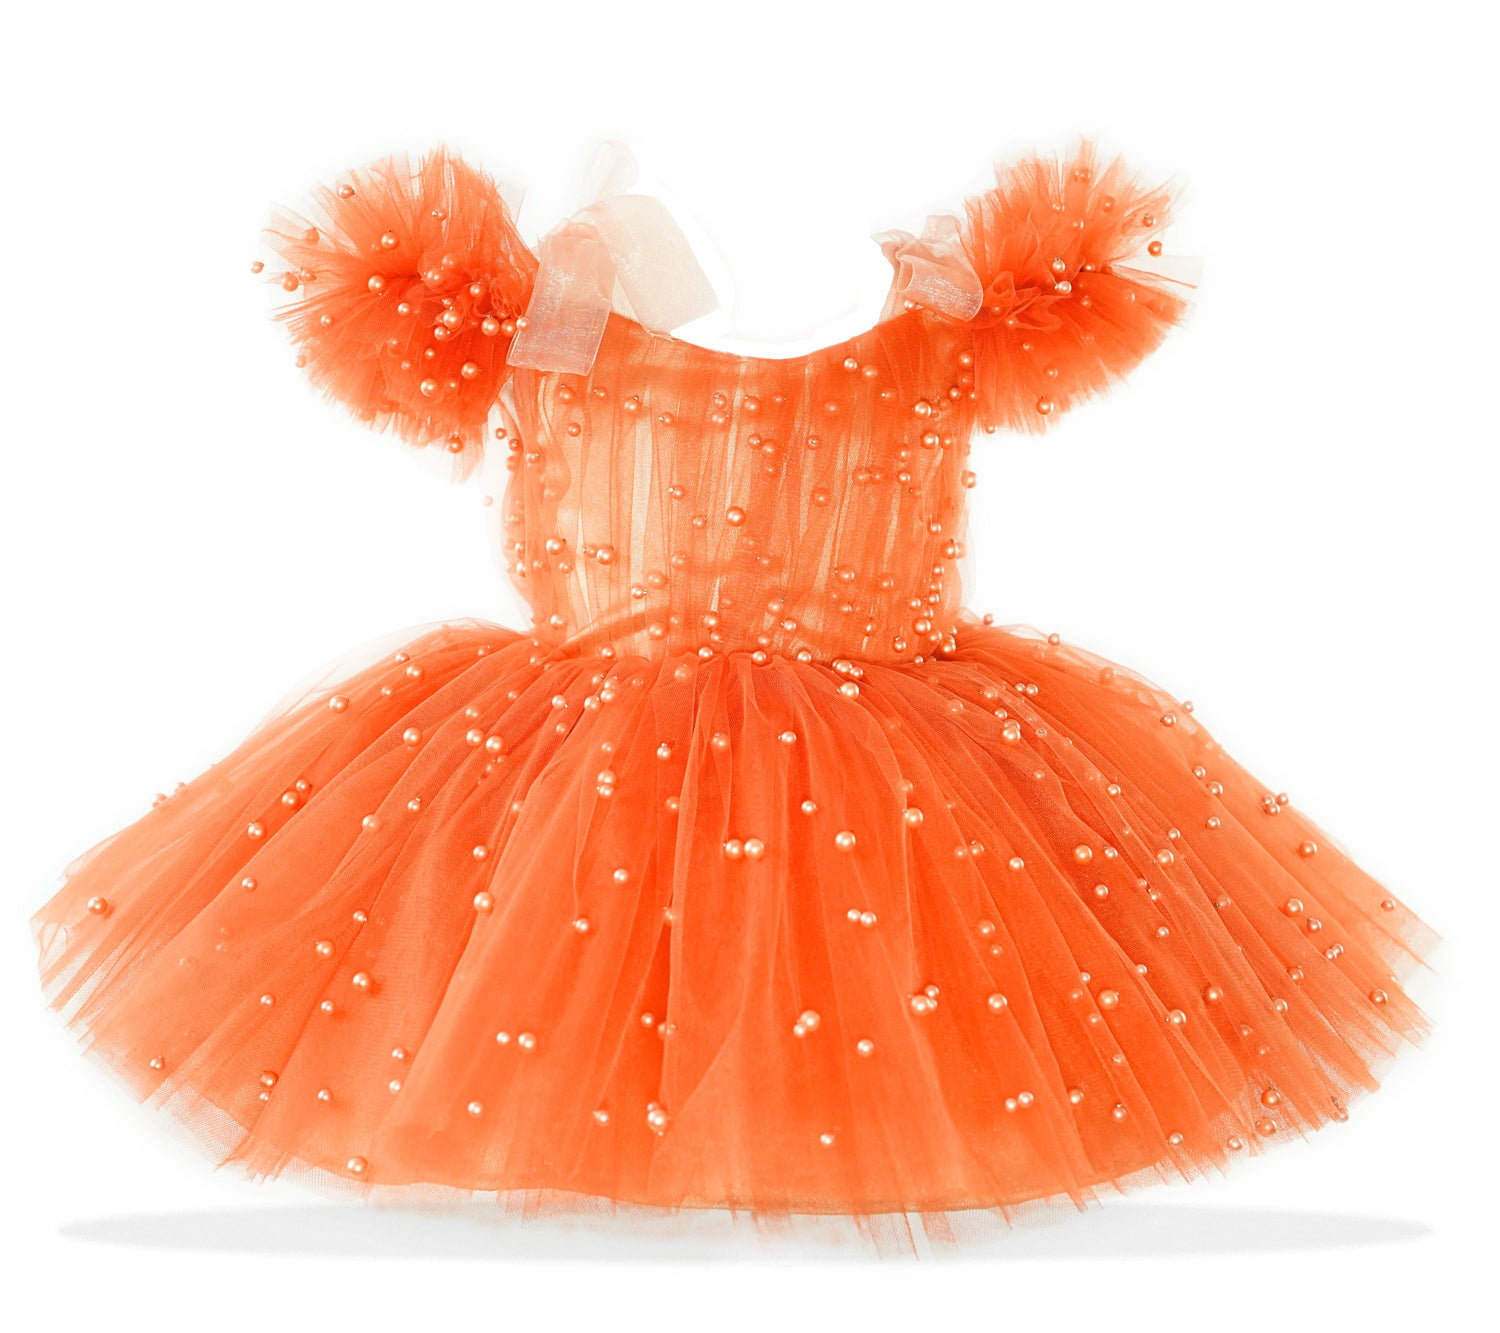 a little girl's orange dress with white dots